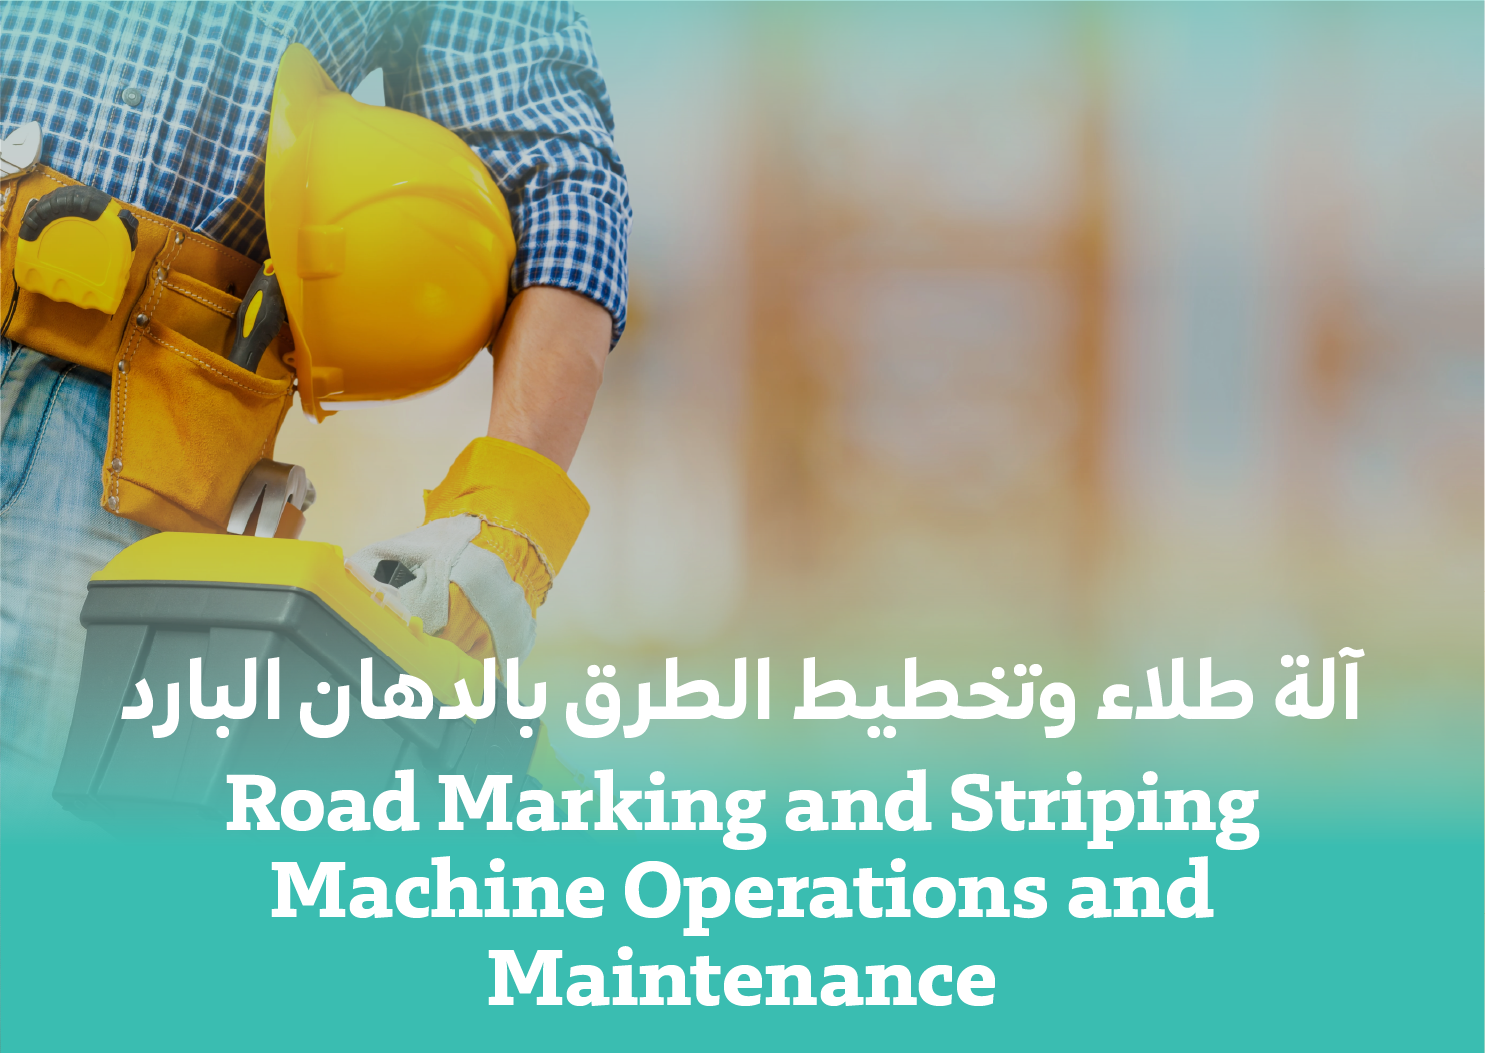 Road Marking and Striping Machine Operations and Maintenance